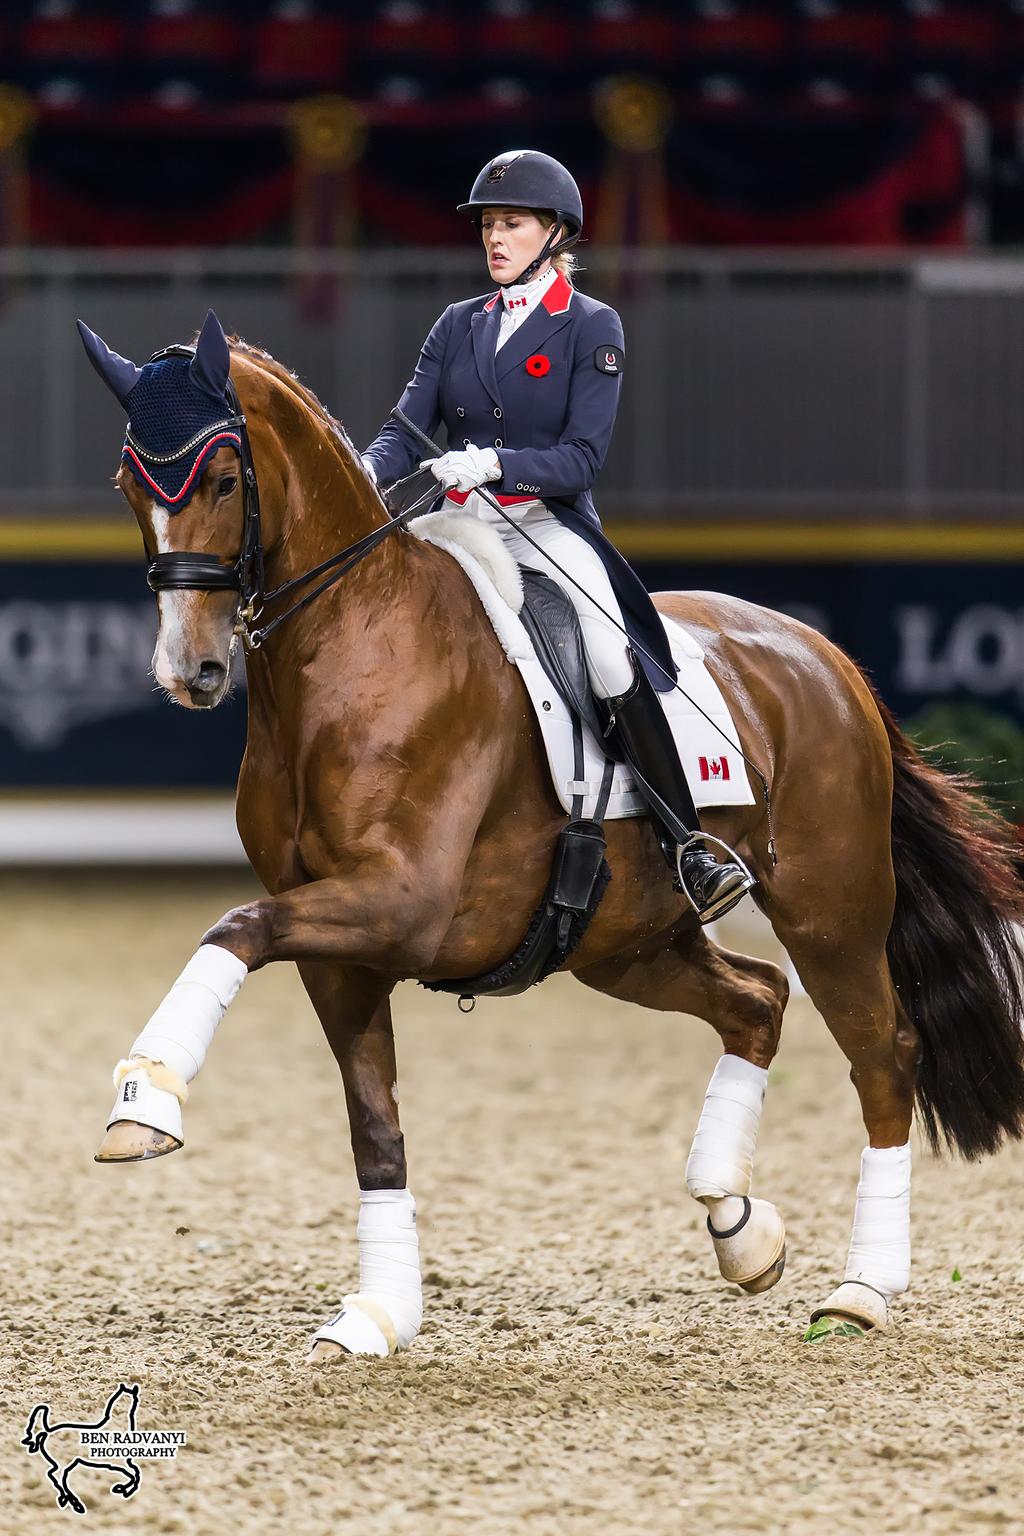 Challenge on Thursday, the $50,000 Weston Canadian Open on Friday night, and the highly-anticipated conclusion, the $205,000 Longines FEI Jumping World CupTM Toronto on Saturday, November 10.